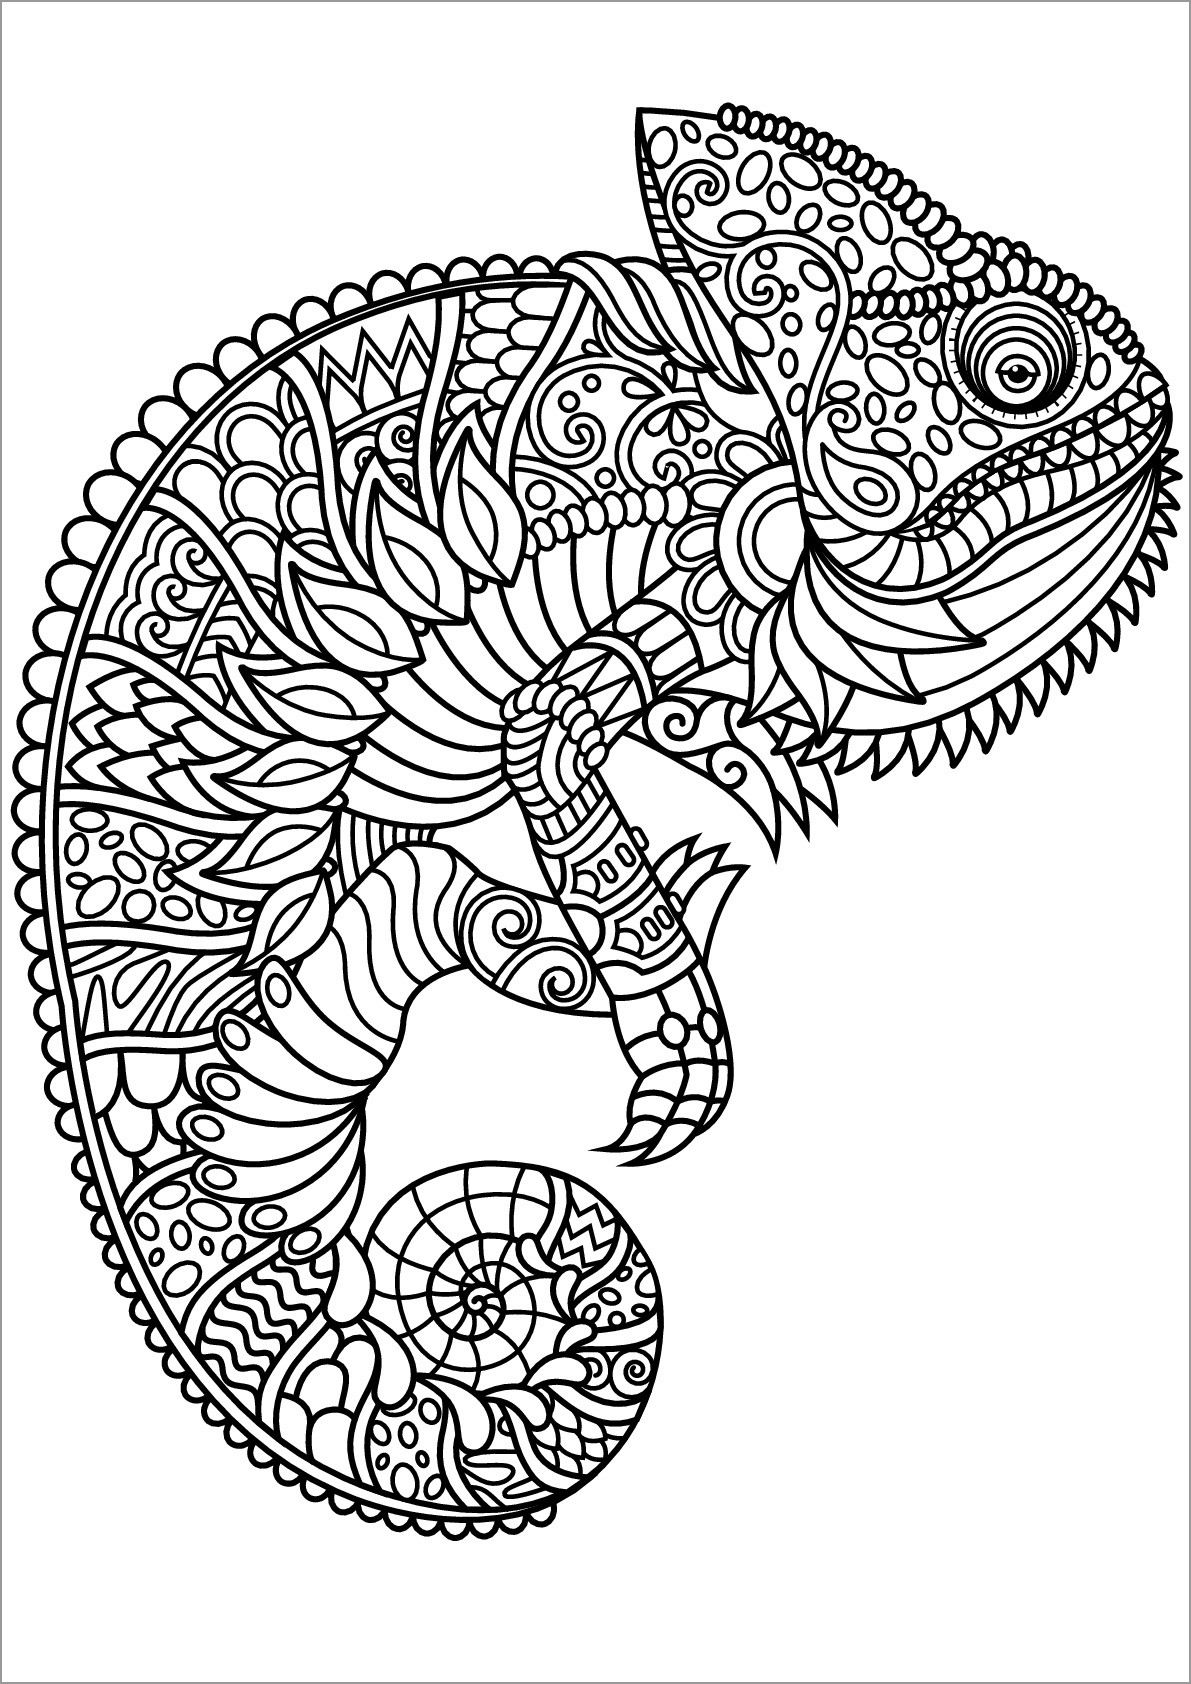 Chameleon Lizards Coloring Pages for Adult